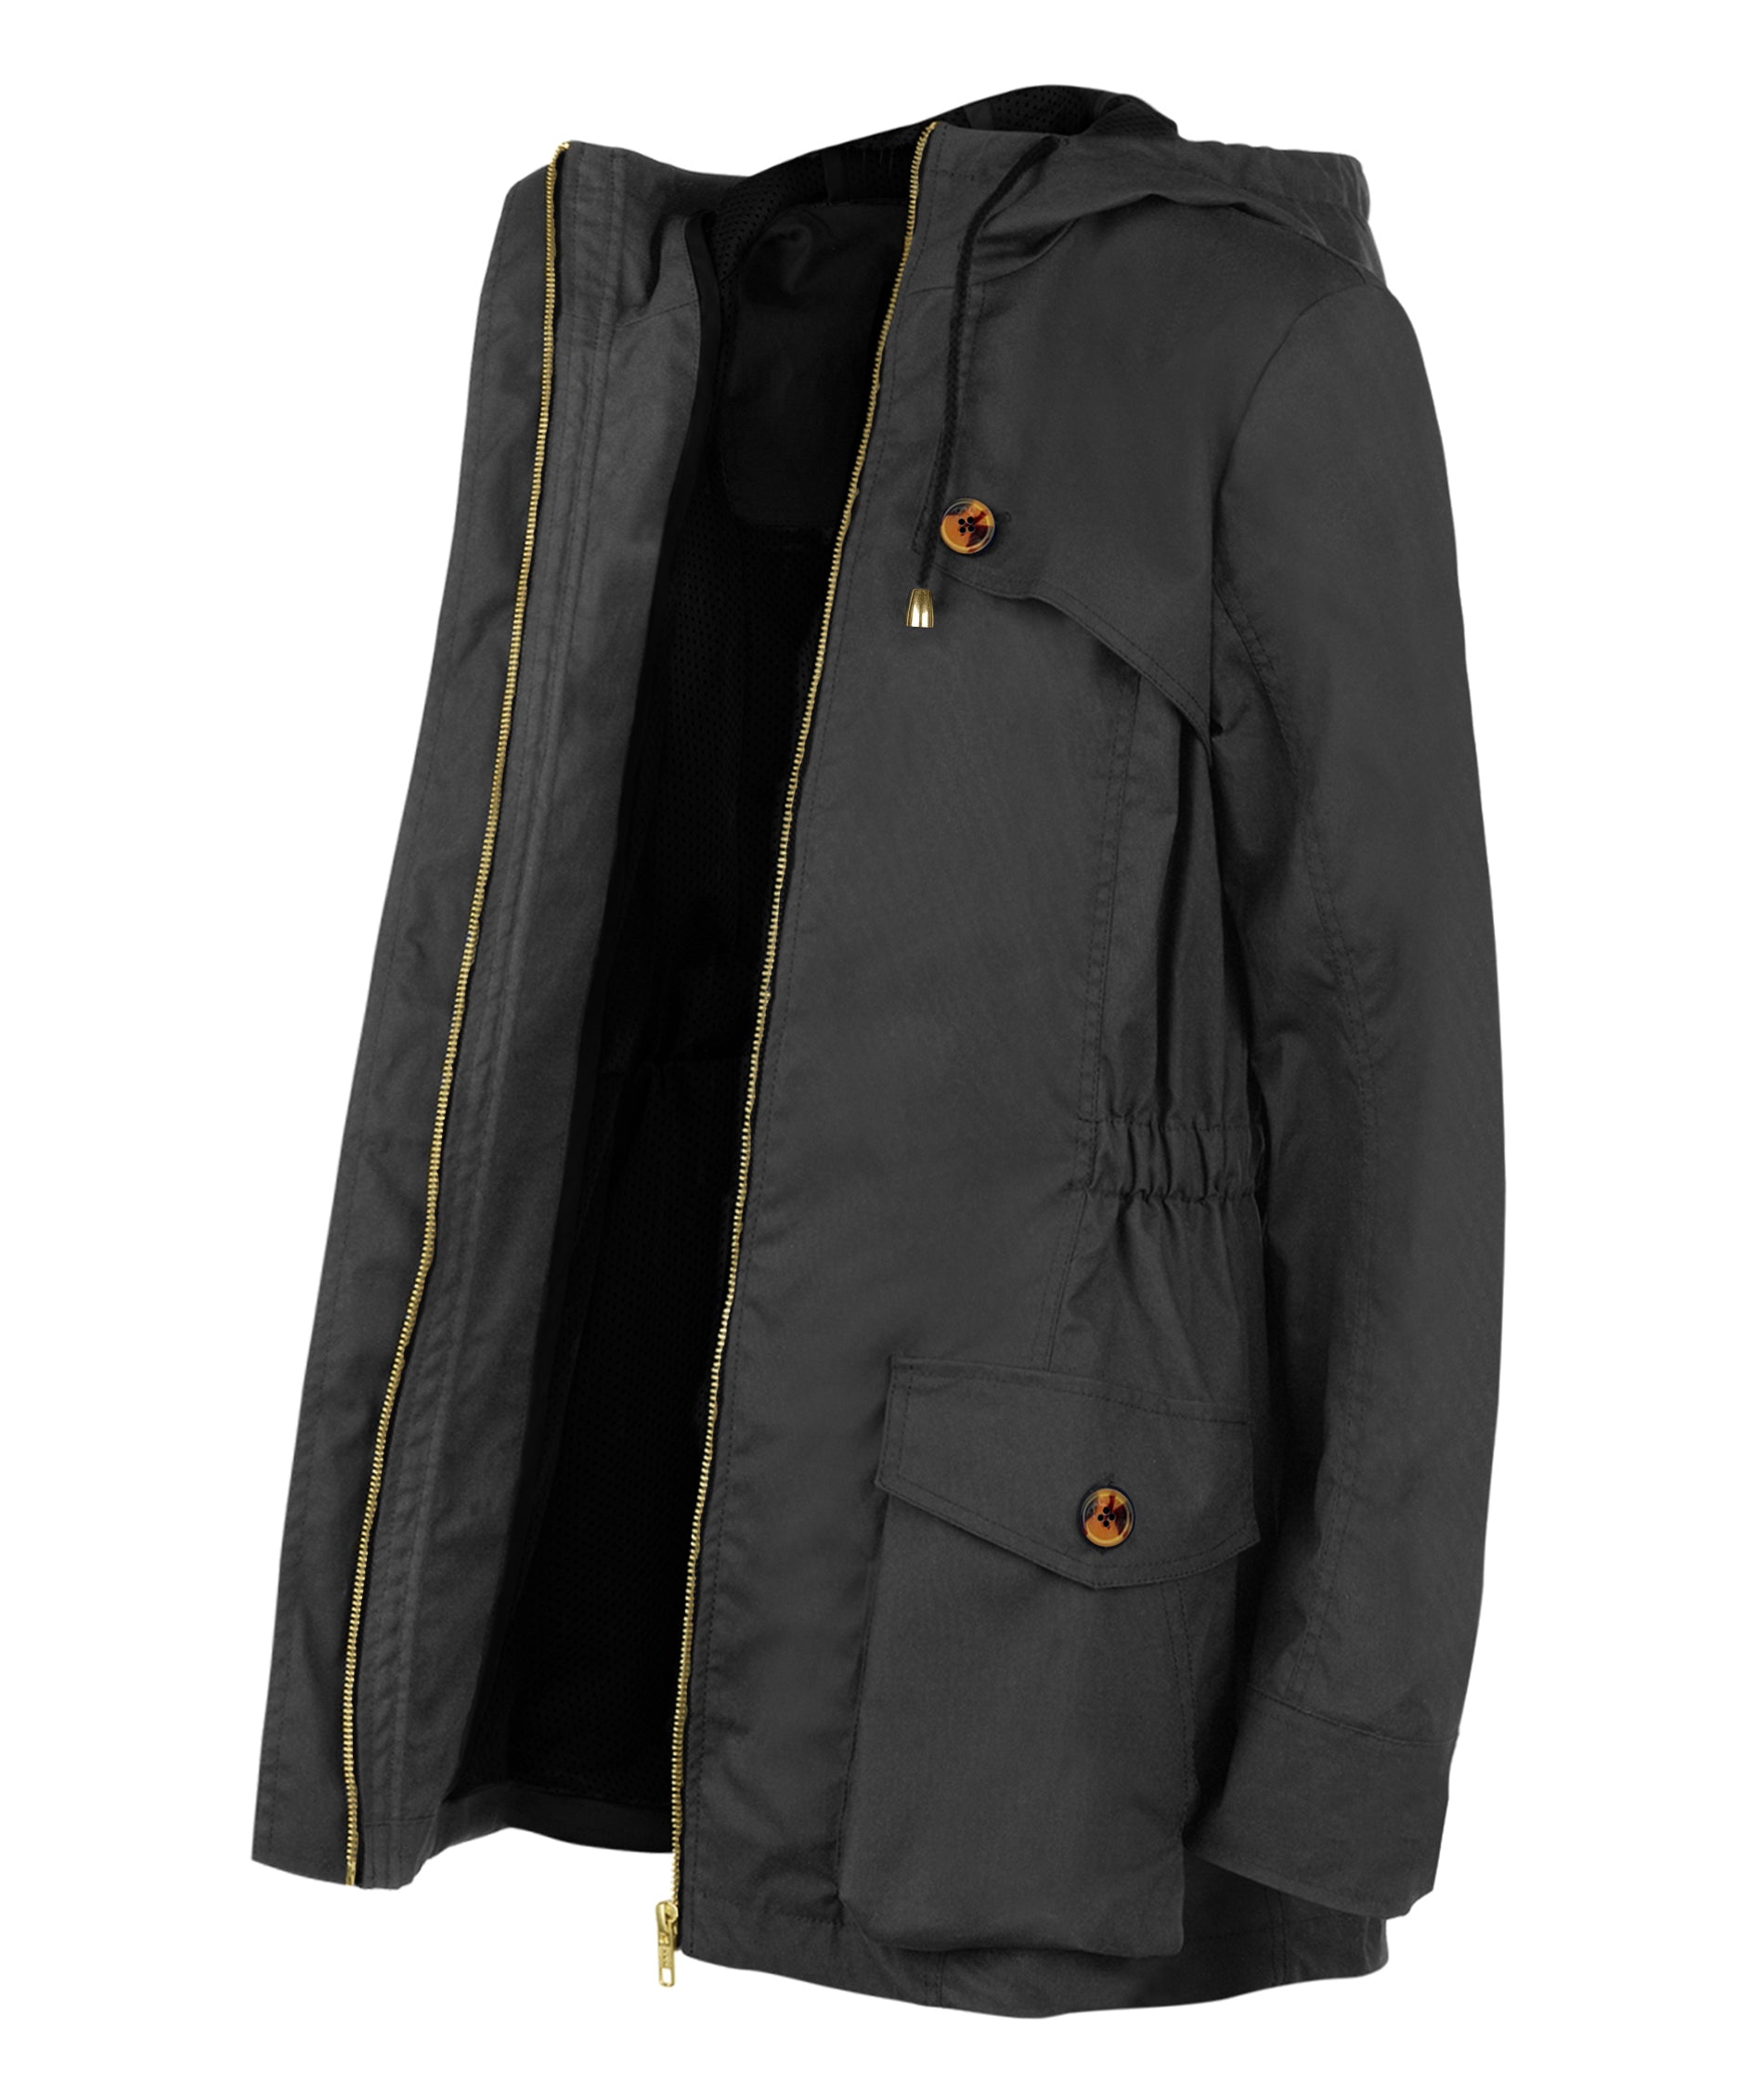 Black Ladies and Women's Waterproof Wax Jacket or Coat with Tortoiseshell Buttons